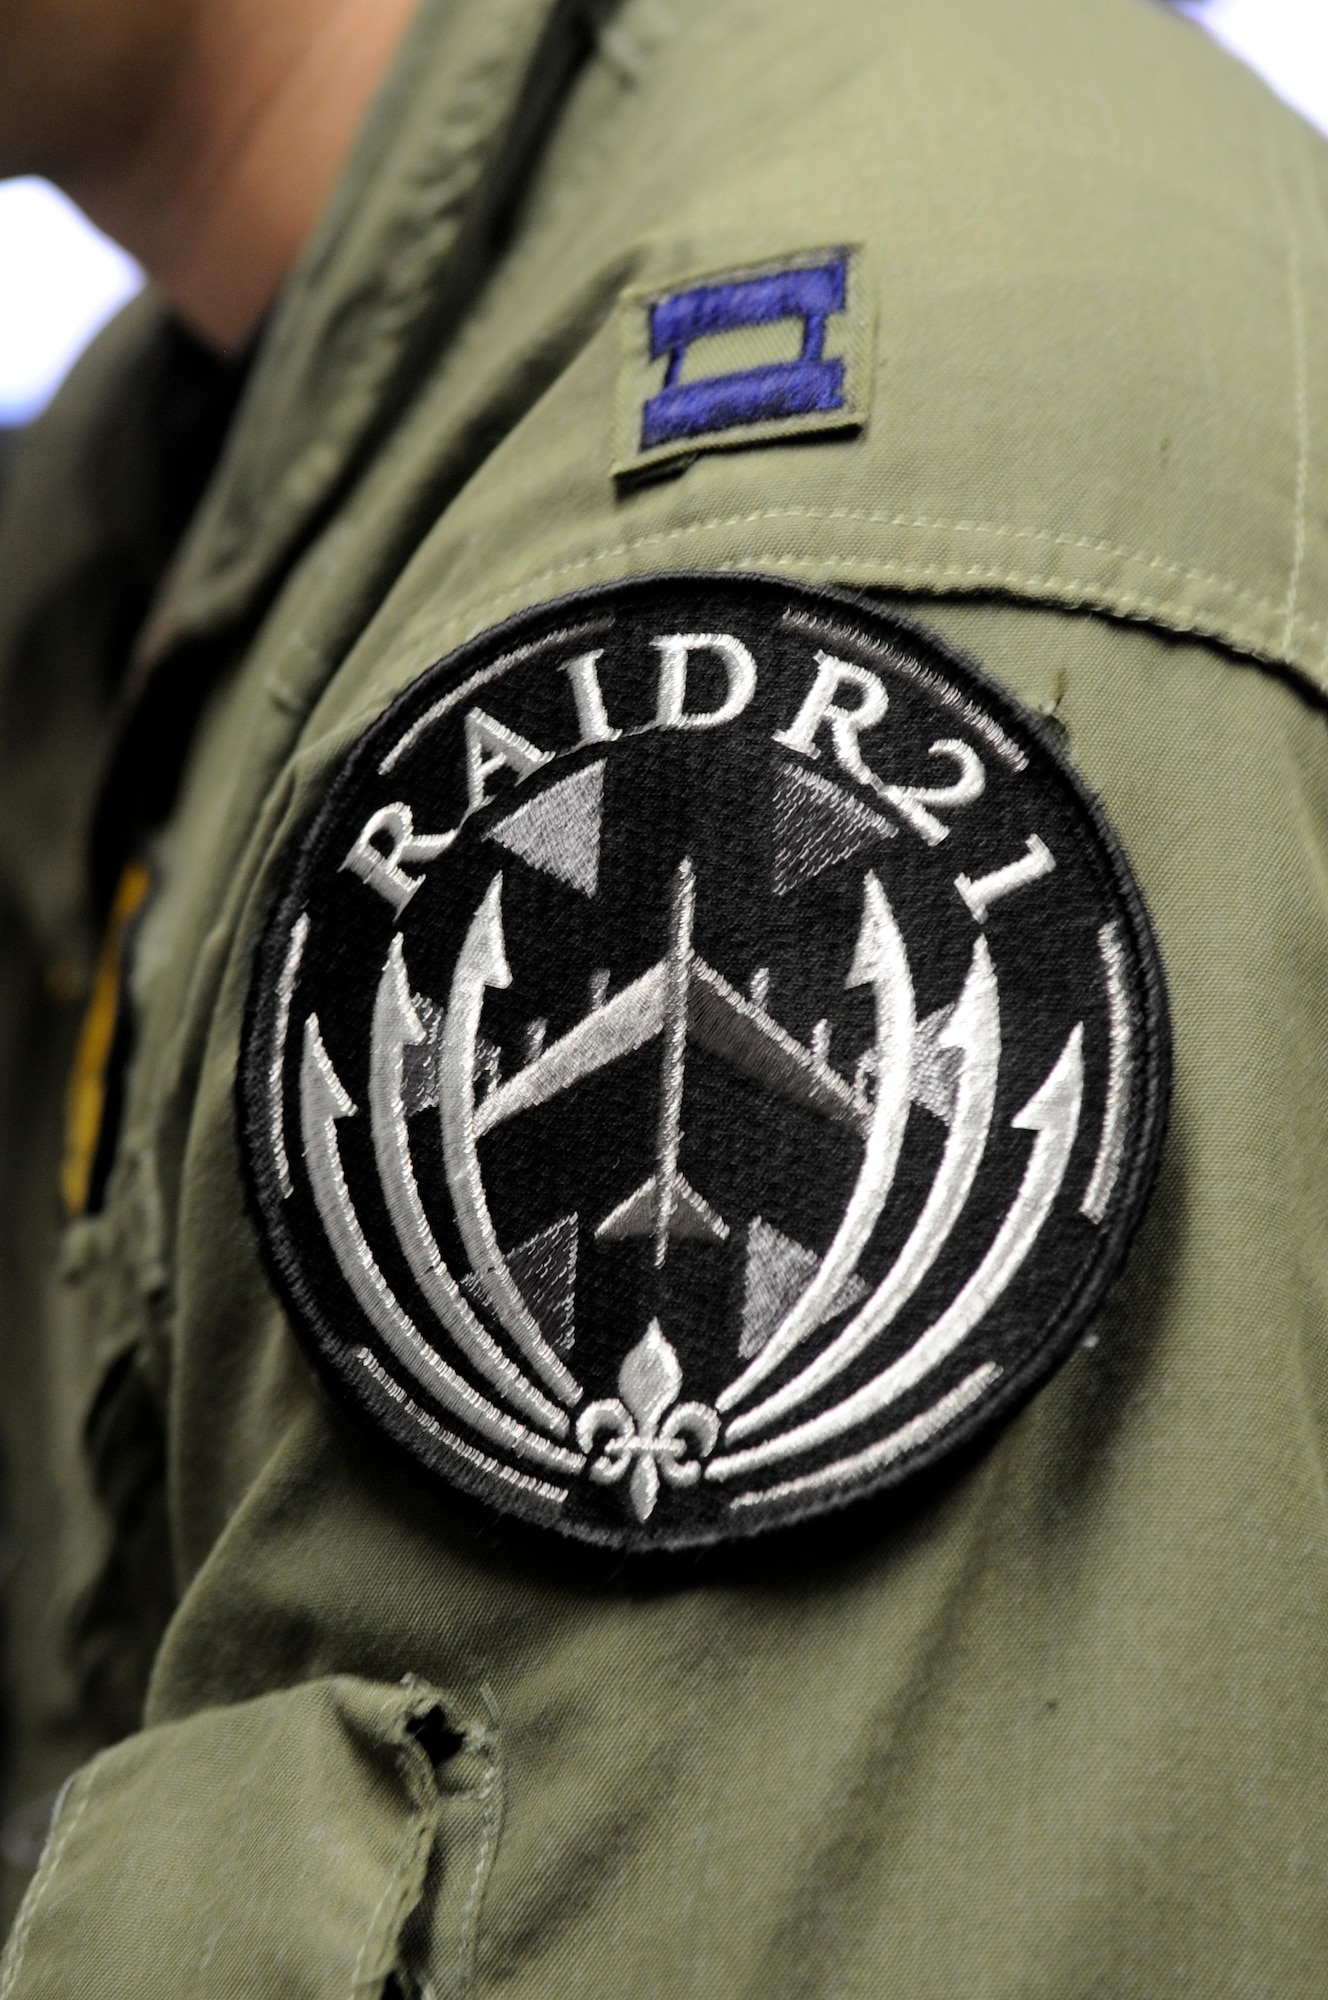 Aircrew from the bomber community sometimes wear a RAIDR 21 patch to honor and remember their fallen brothers on Fridays. RAIDR 21 was the call sign of a B-52H from Barksdale Air Force Base, La., which crashed off the coast of Guam July 21, 2008, killing the six aircrew. (U.S. Air Force photo/Staff Sgt. John Gordinier)(RELEASED)